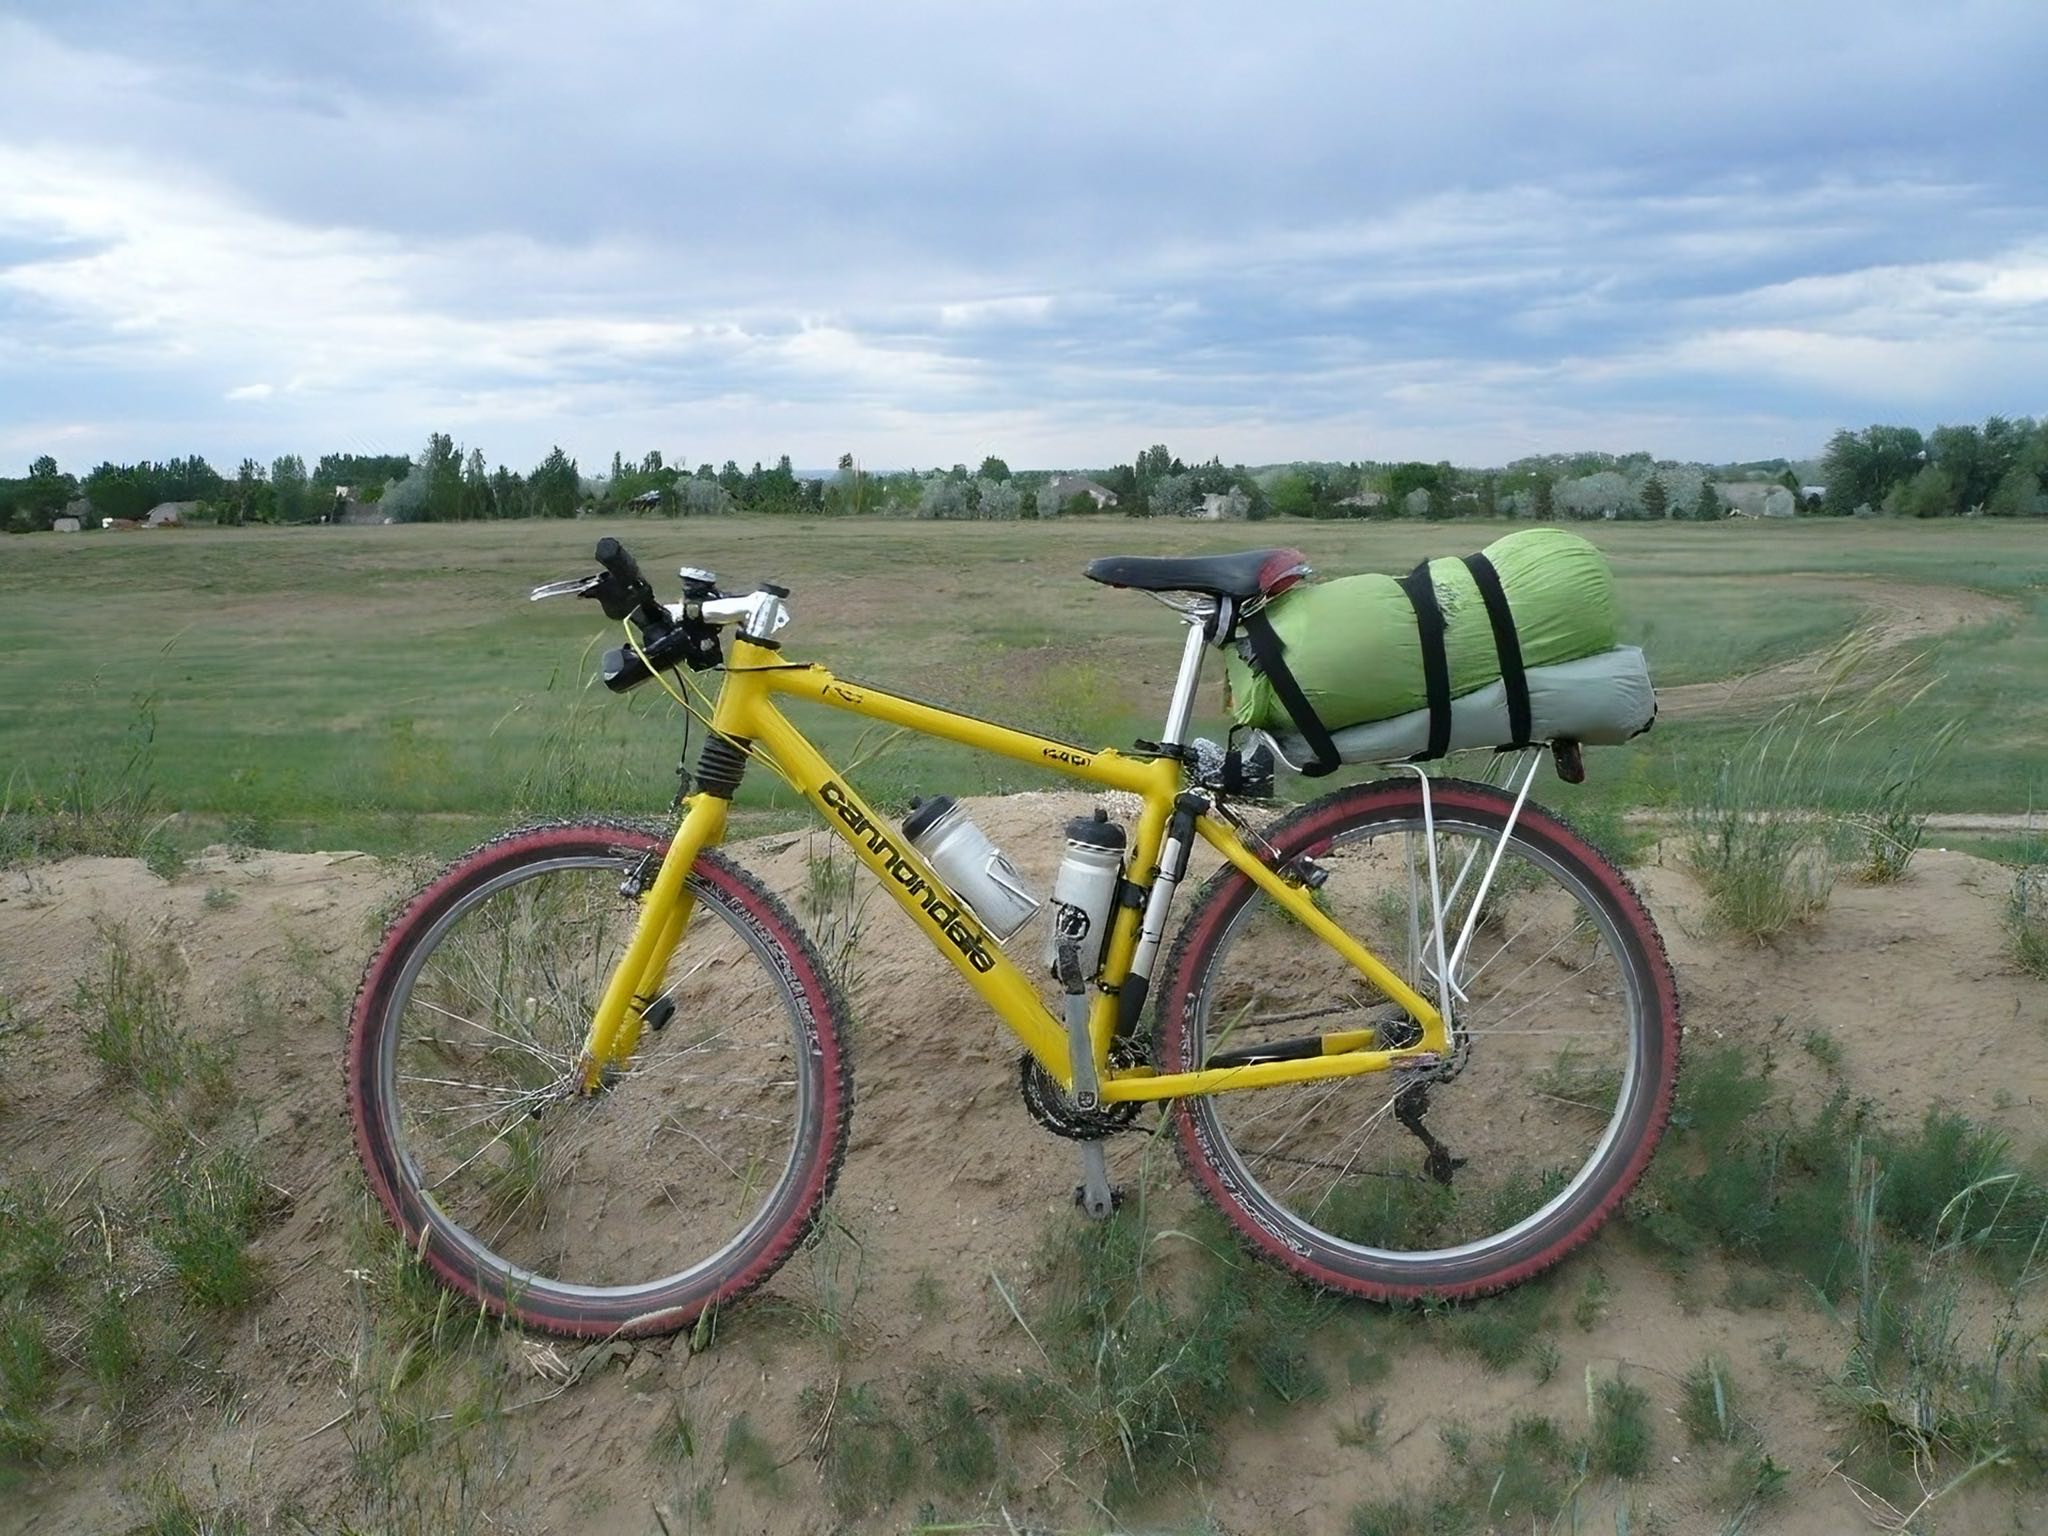 My Speed Yellow 1996 Cannondale F700 CAAD3 mountain bike in the field behind my house in Fort Collins, all prepared for the 2008 Tour Divide bikepacking mountain bike race.